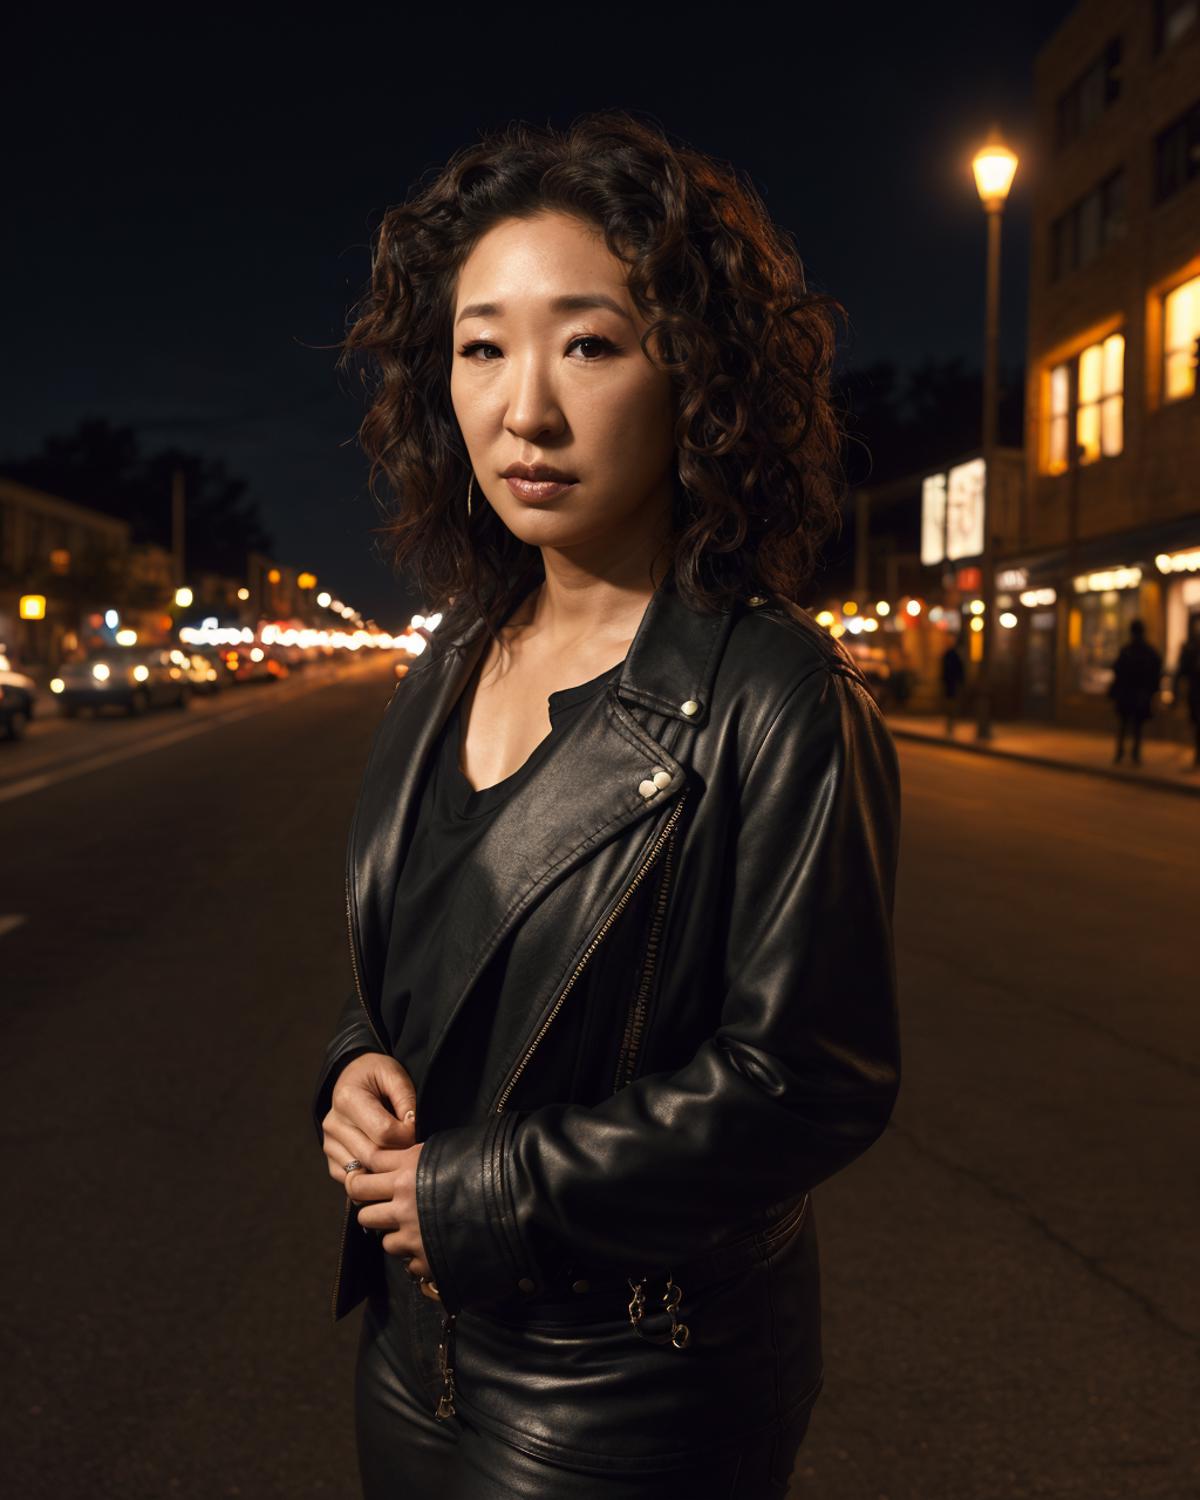 sandra oh image by NotACompleteIdiot